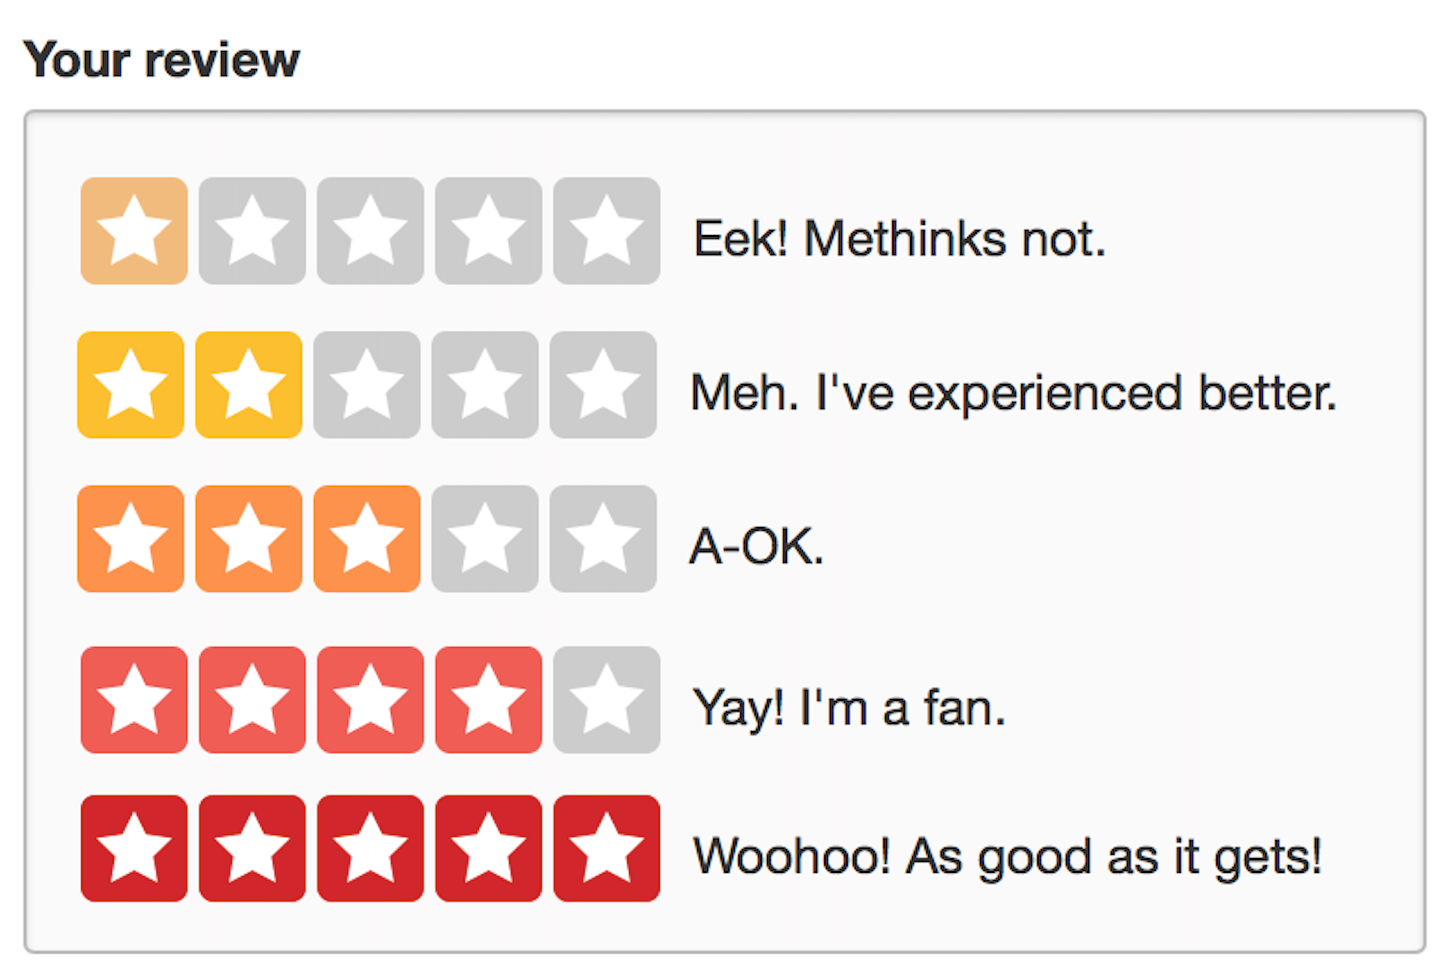 microcopy: screenshot of the Yelp review 5-star rating system